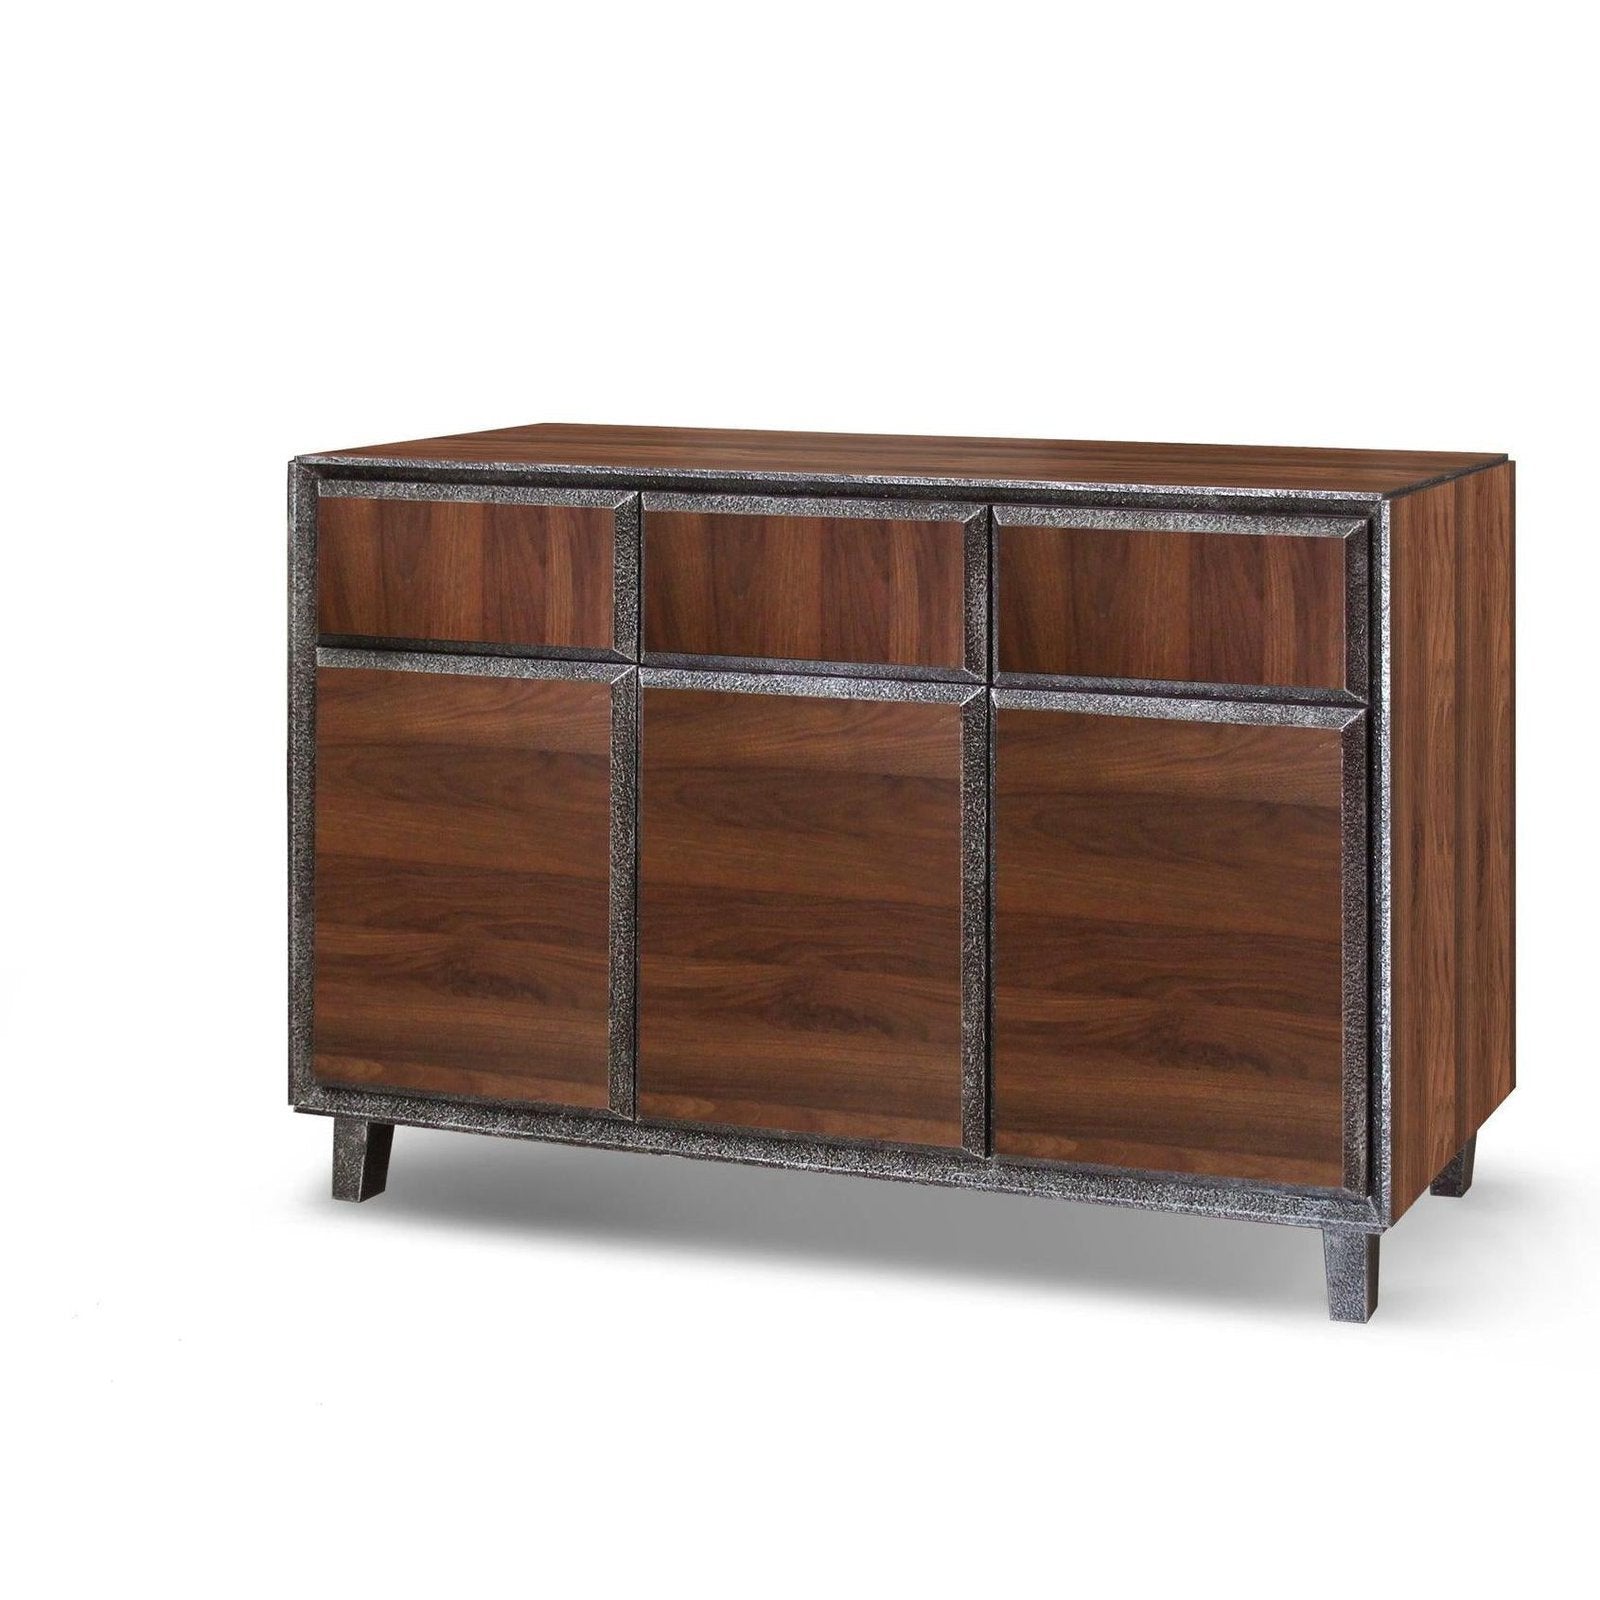 Bretton Walnut Sideboard with 3 Doors & 3 Drawers